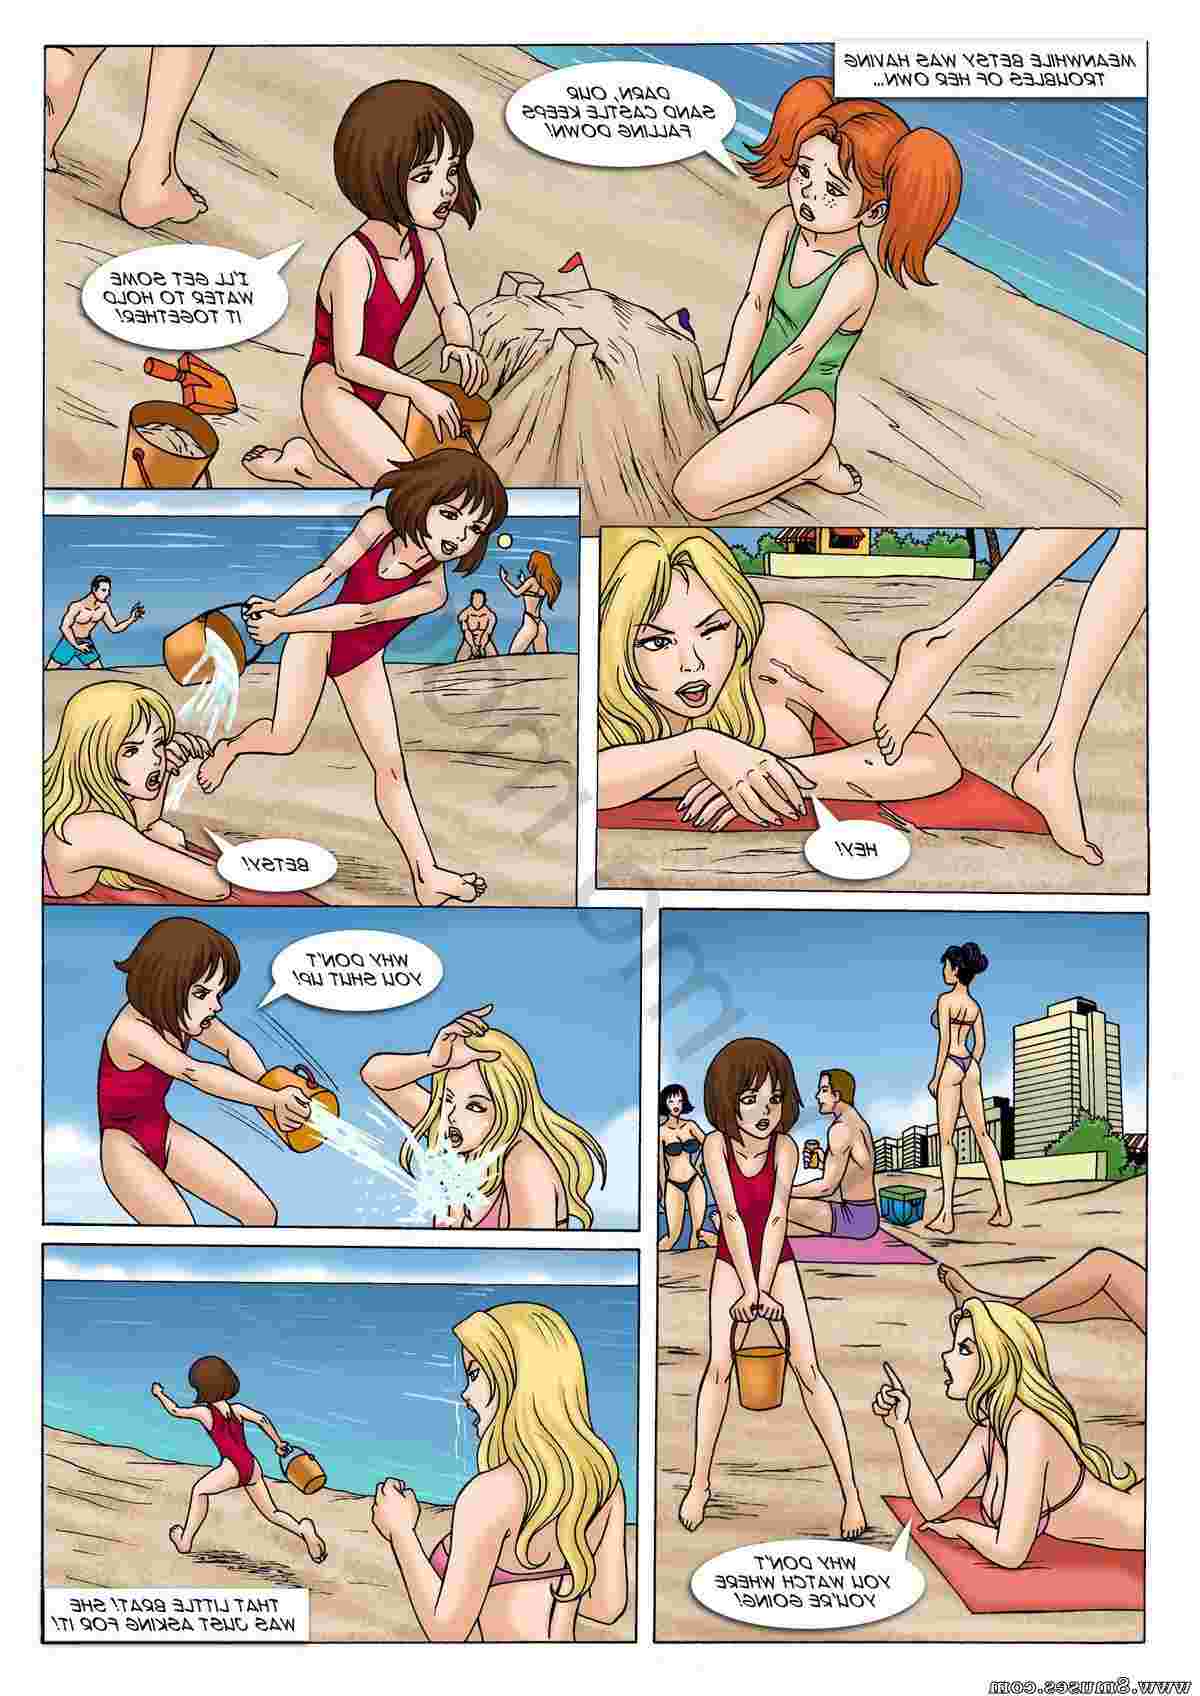 DreamTales-Comics/A-Tale-of-Two-Sisters A_Tale_of_Two_Sisters__8muses_-_Sex_and_Porn_Comics_10.jpg